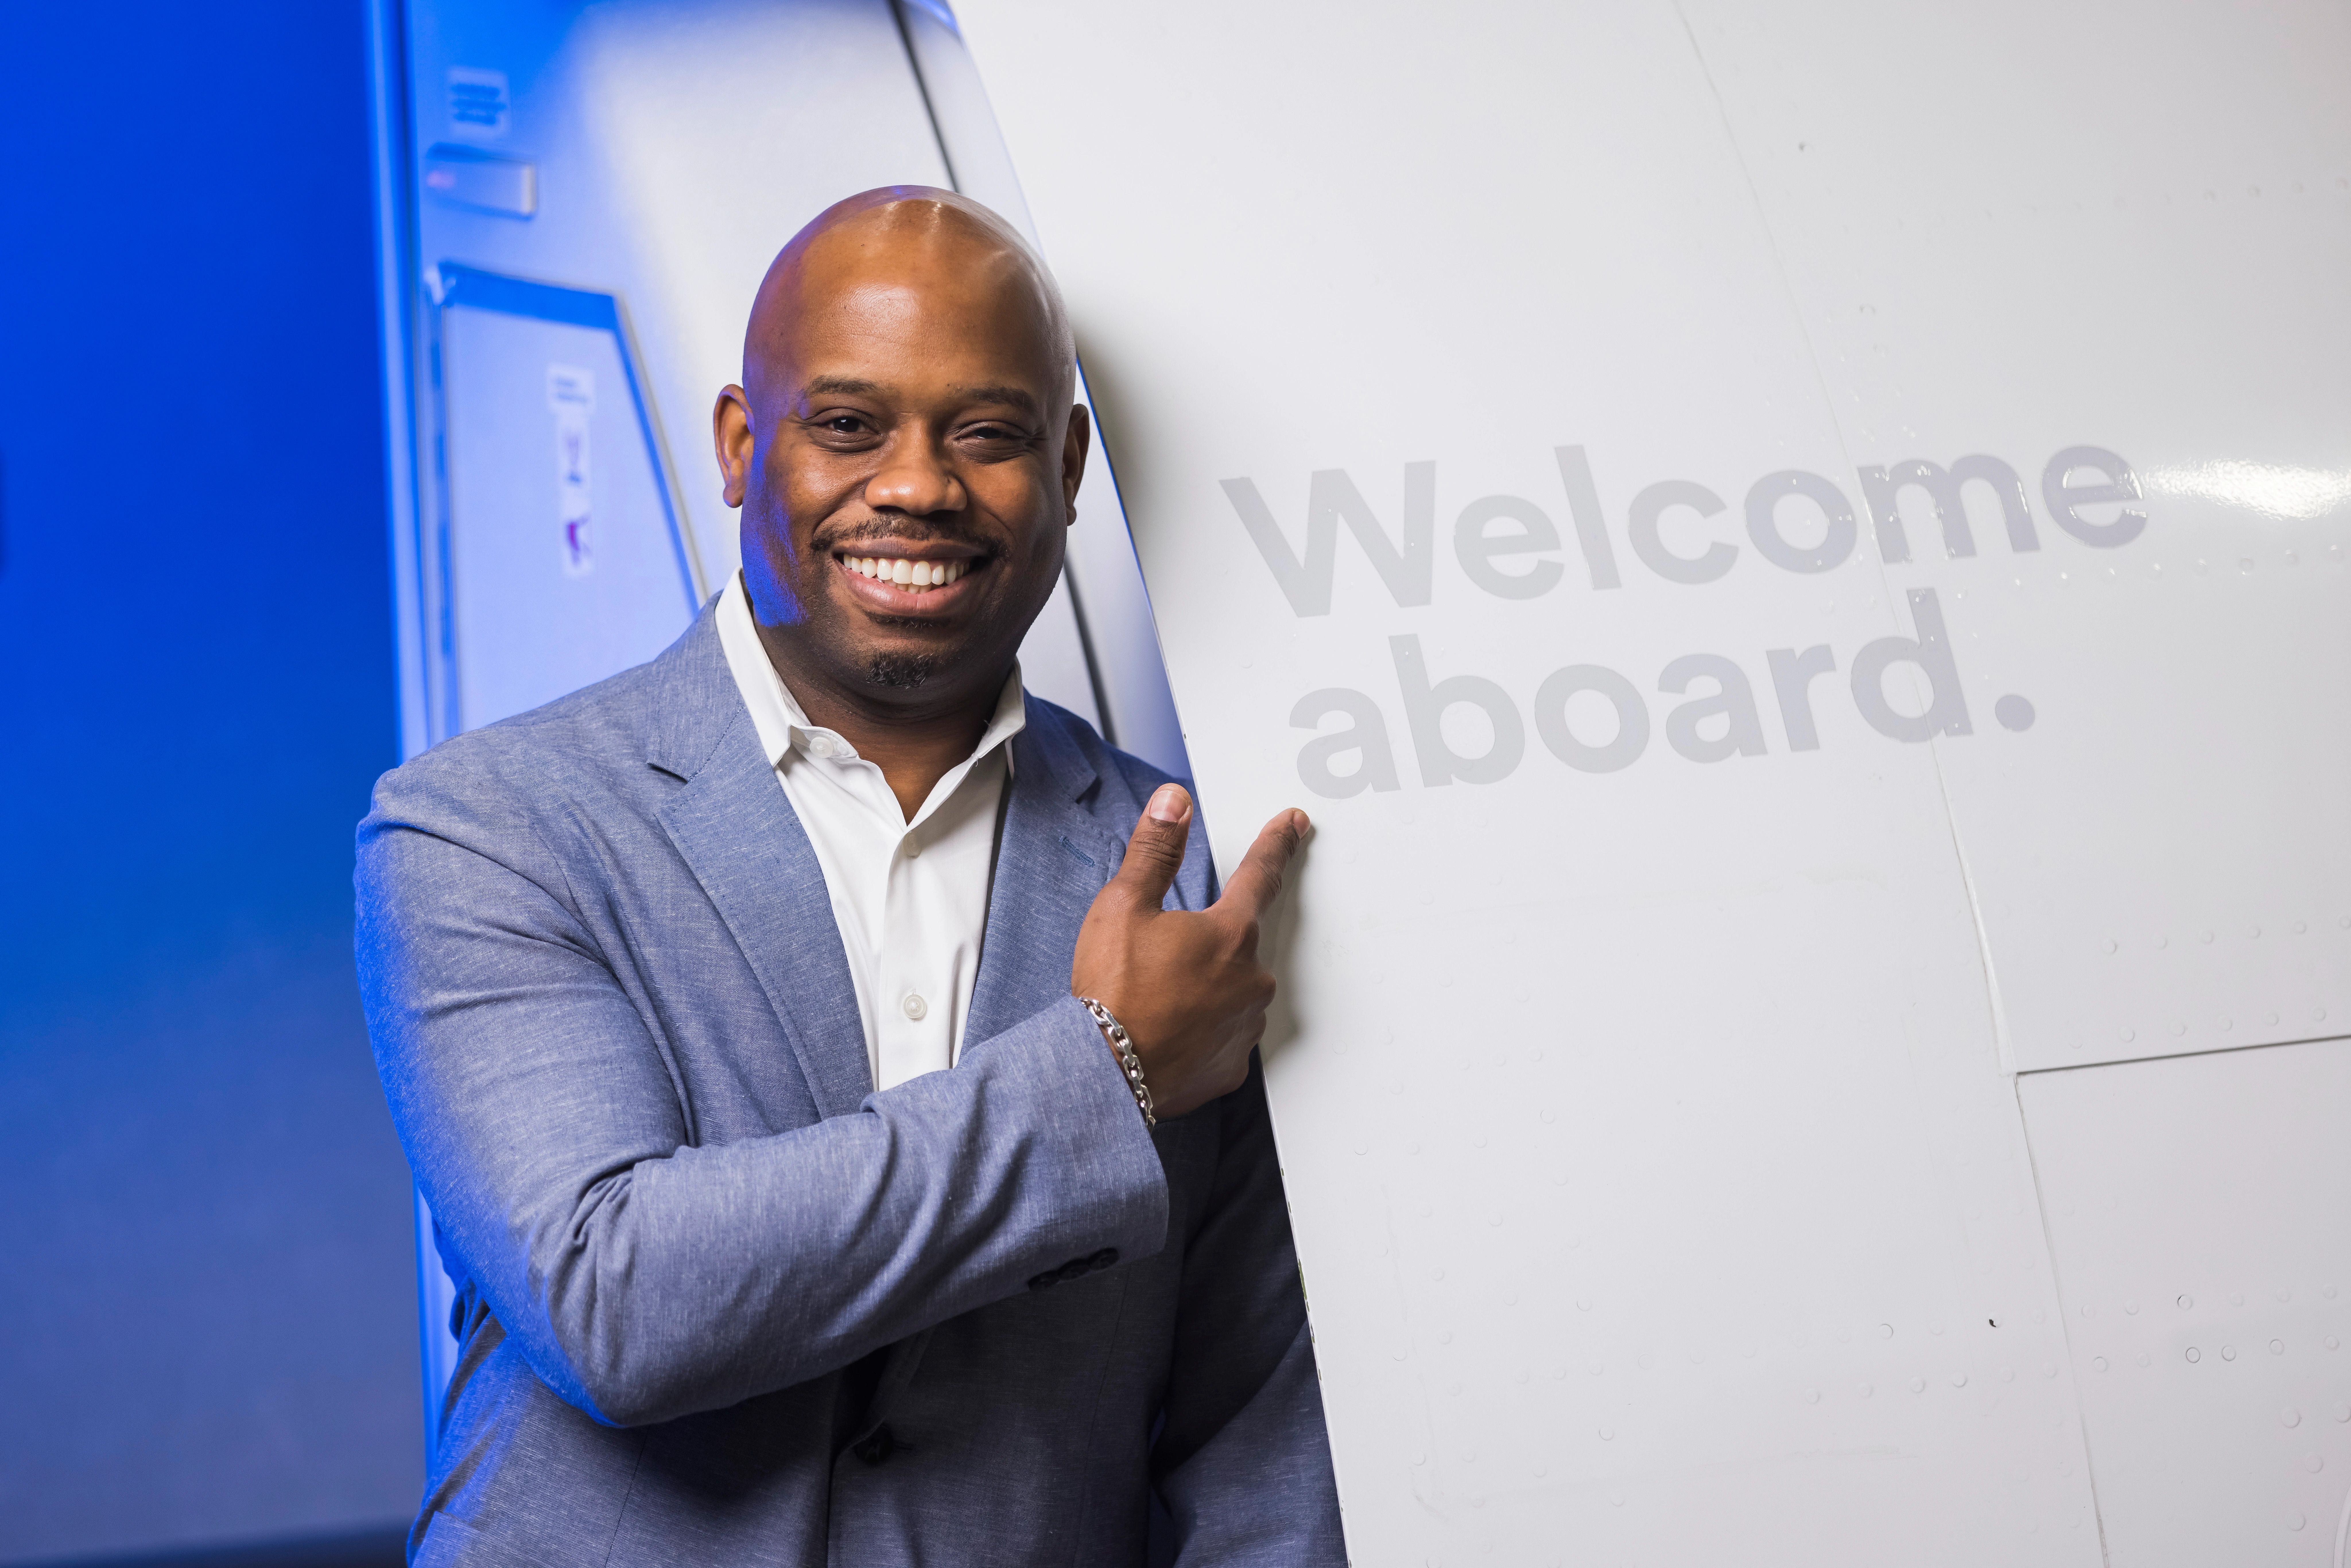 James Thomas, Alaska Airlines Director of Diversity, Equity and Inclusion Posing With the Alaska Airlines "Welcome aboard." Sign